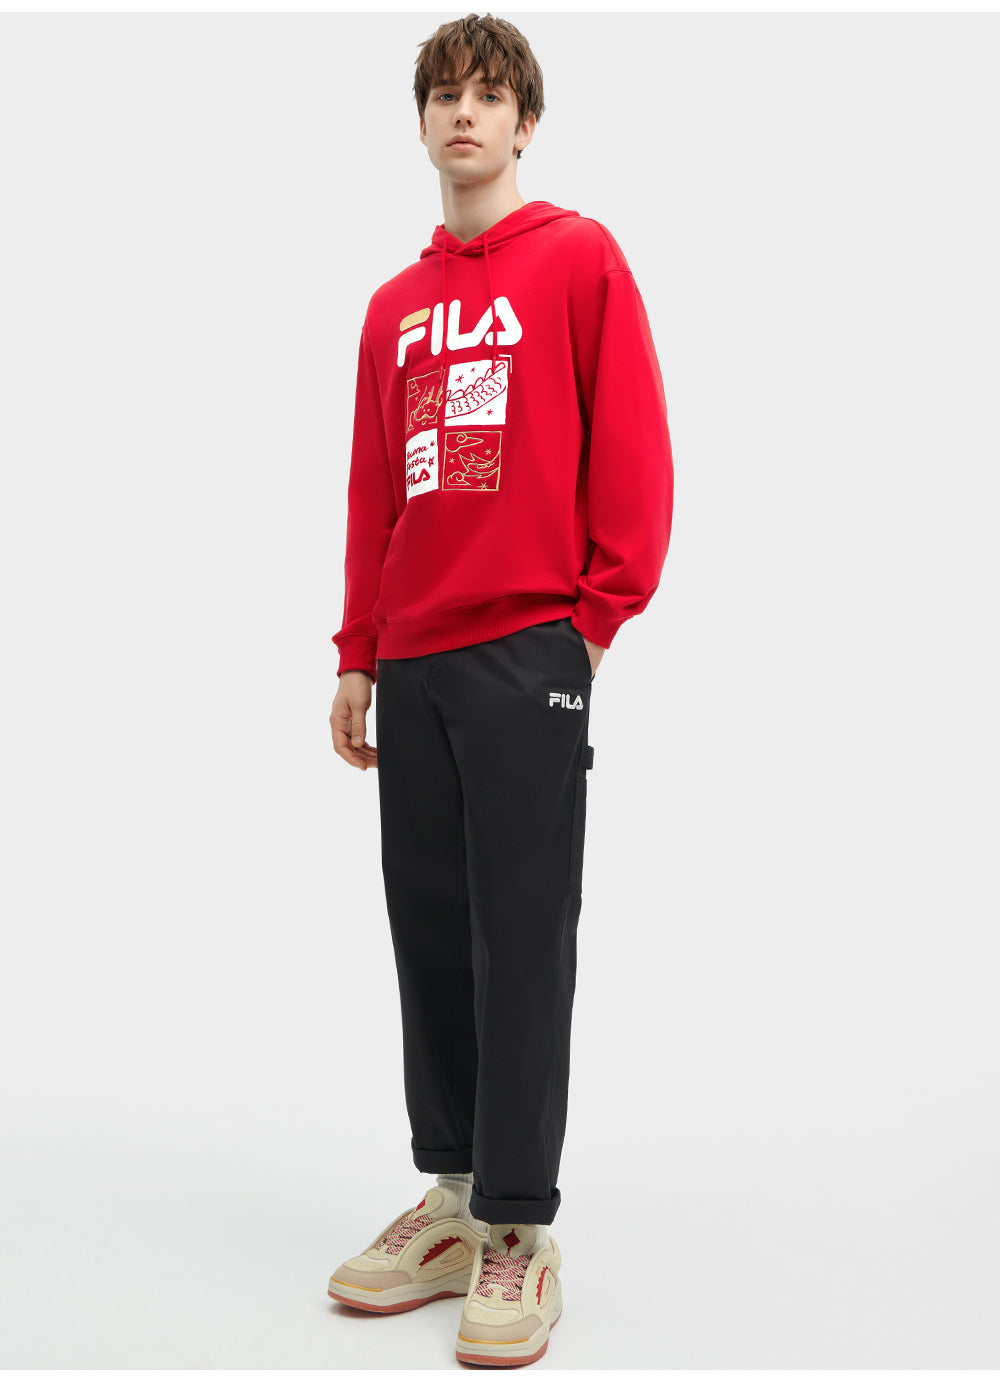 [ CNY Collection ] [ LAY ZHANG ] FILA CORE MIX 2 CNY Chinese New Year